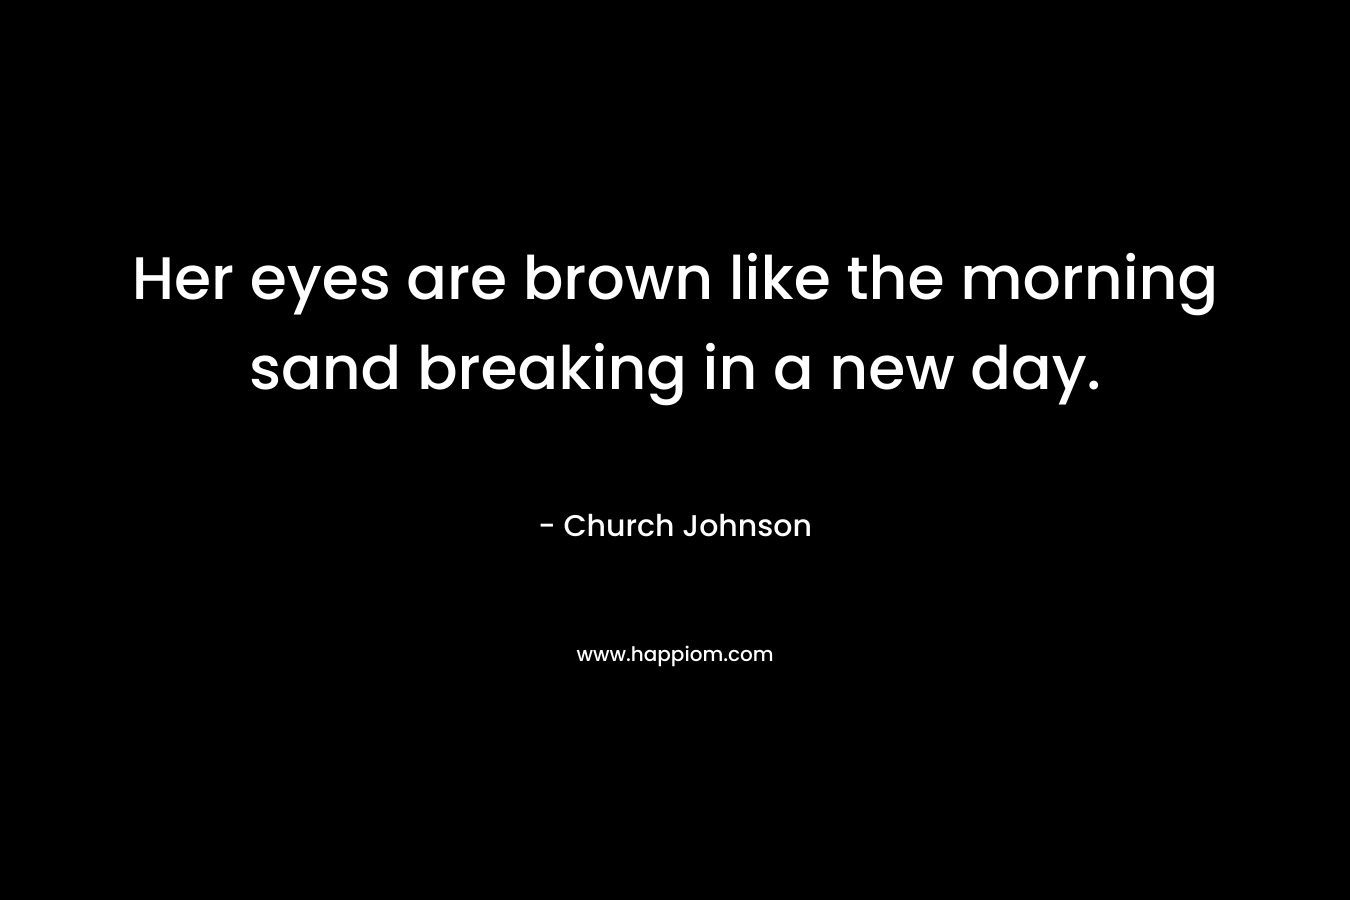 Her eyes are brown like the morning sand breaking in a new day. – Church Johnson